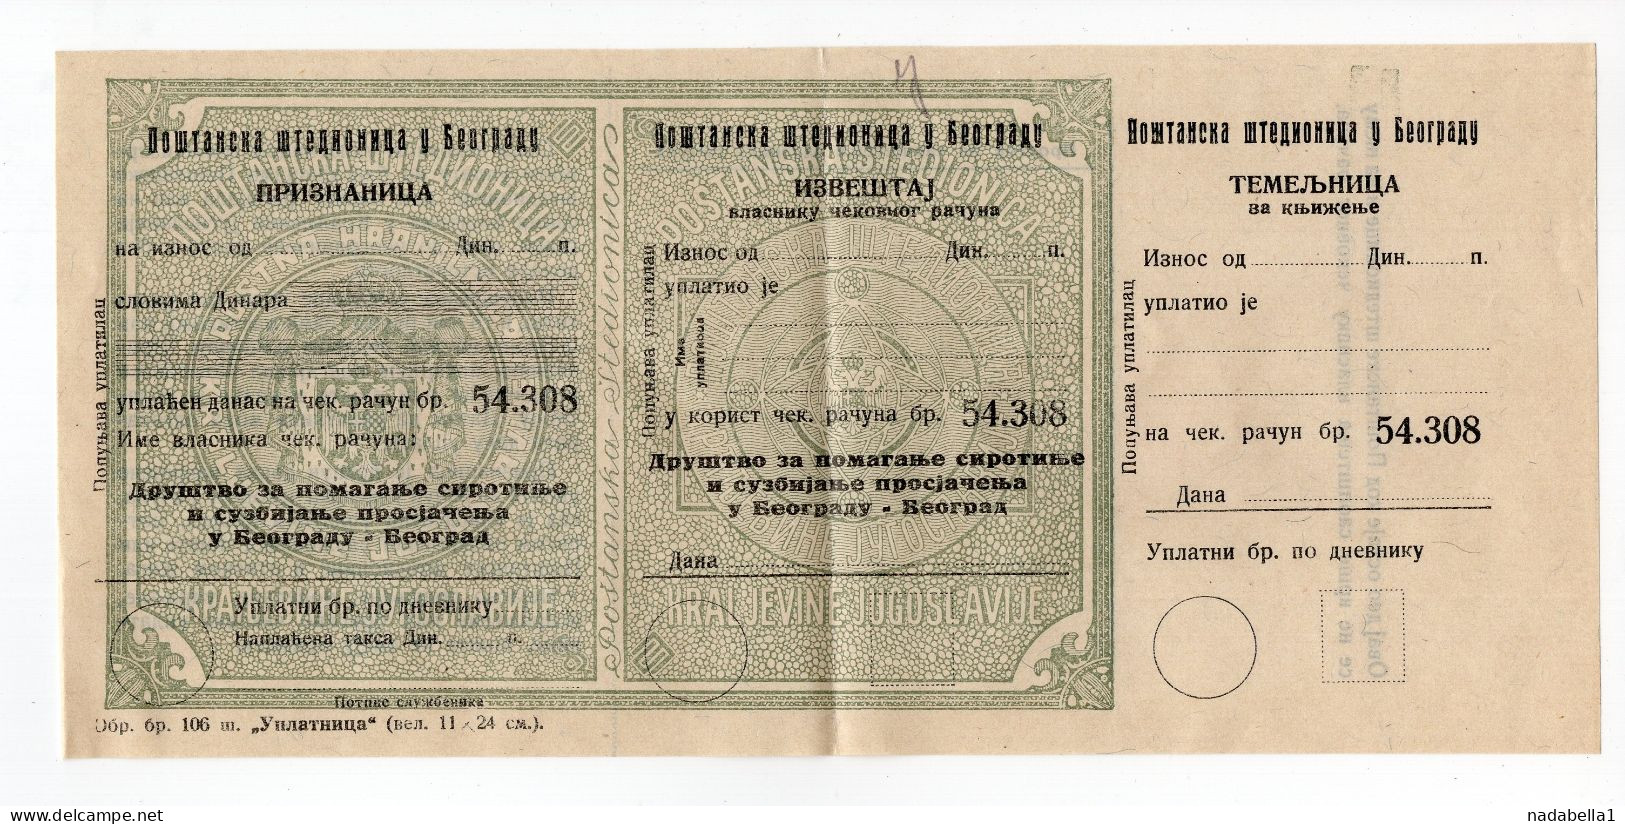 1930s KINGDOM OF YUGOSLAVIA,BELGRADE,CHARITY HELPING AND STOPPING BEGGING IN BELGRADE,POSTAL SAVINS BANK CHEQUE - Chèques & Chèques De Voyage